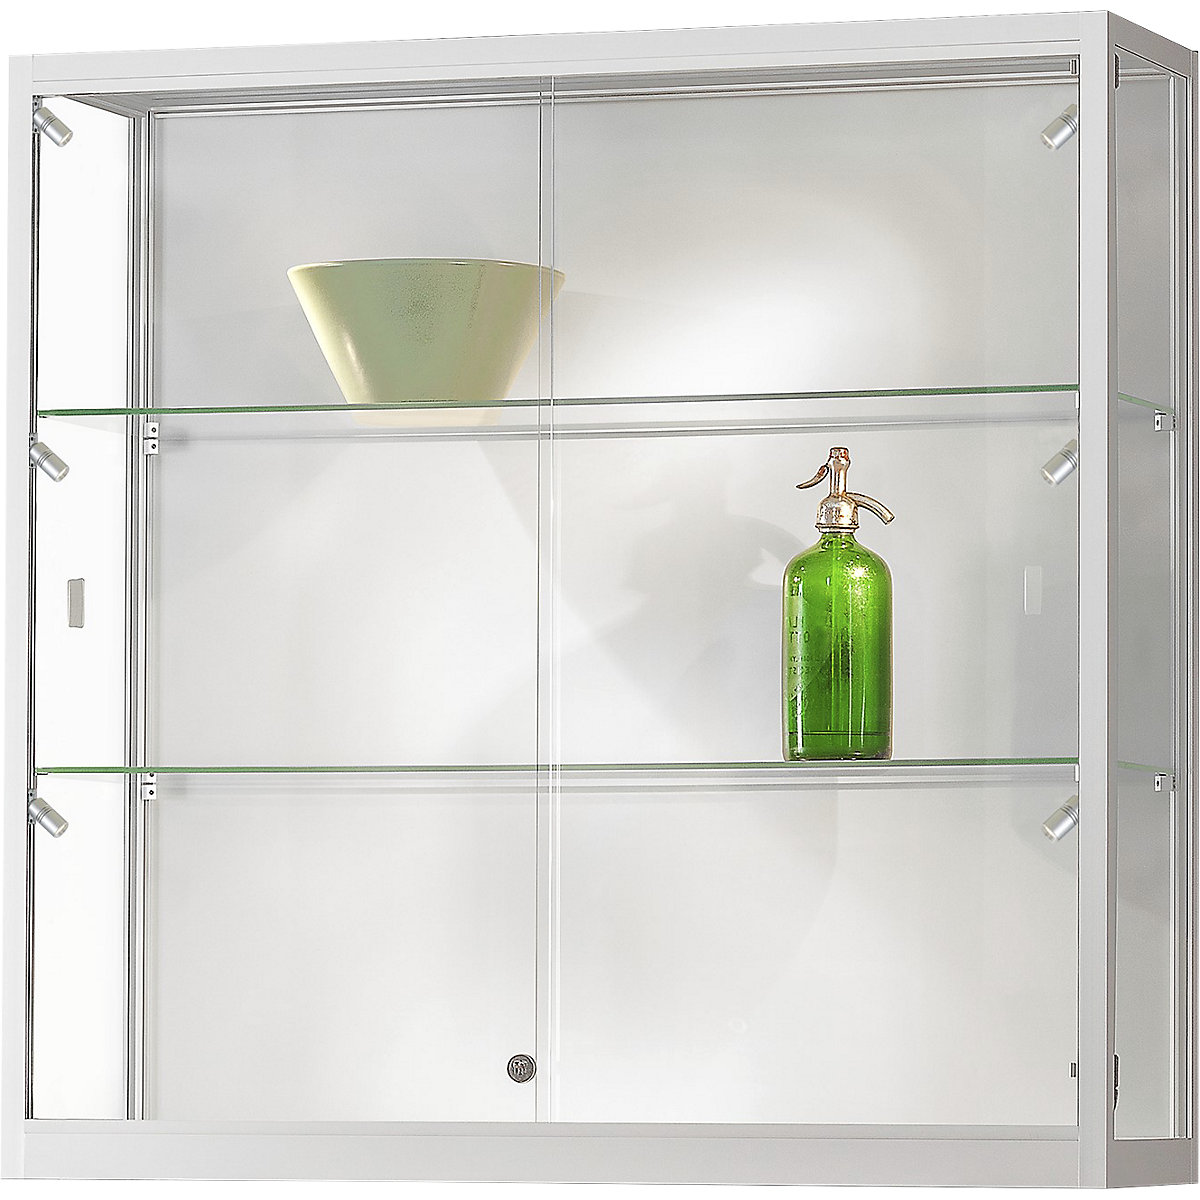 Wall mounted glass cabinet with LED lighting